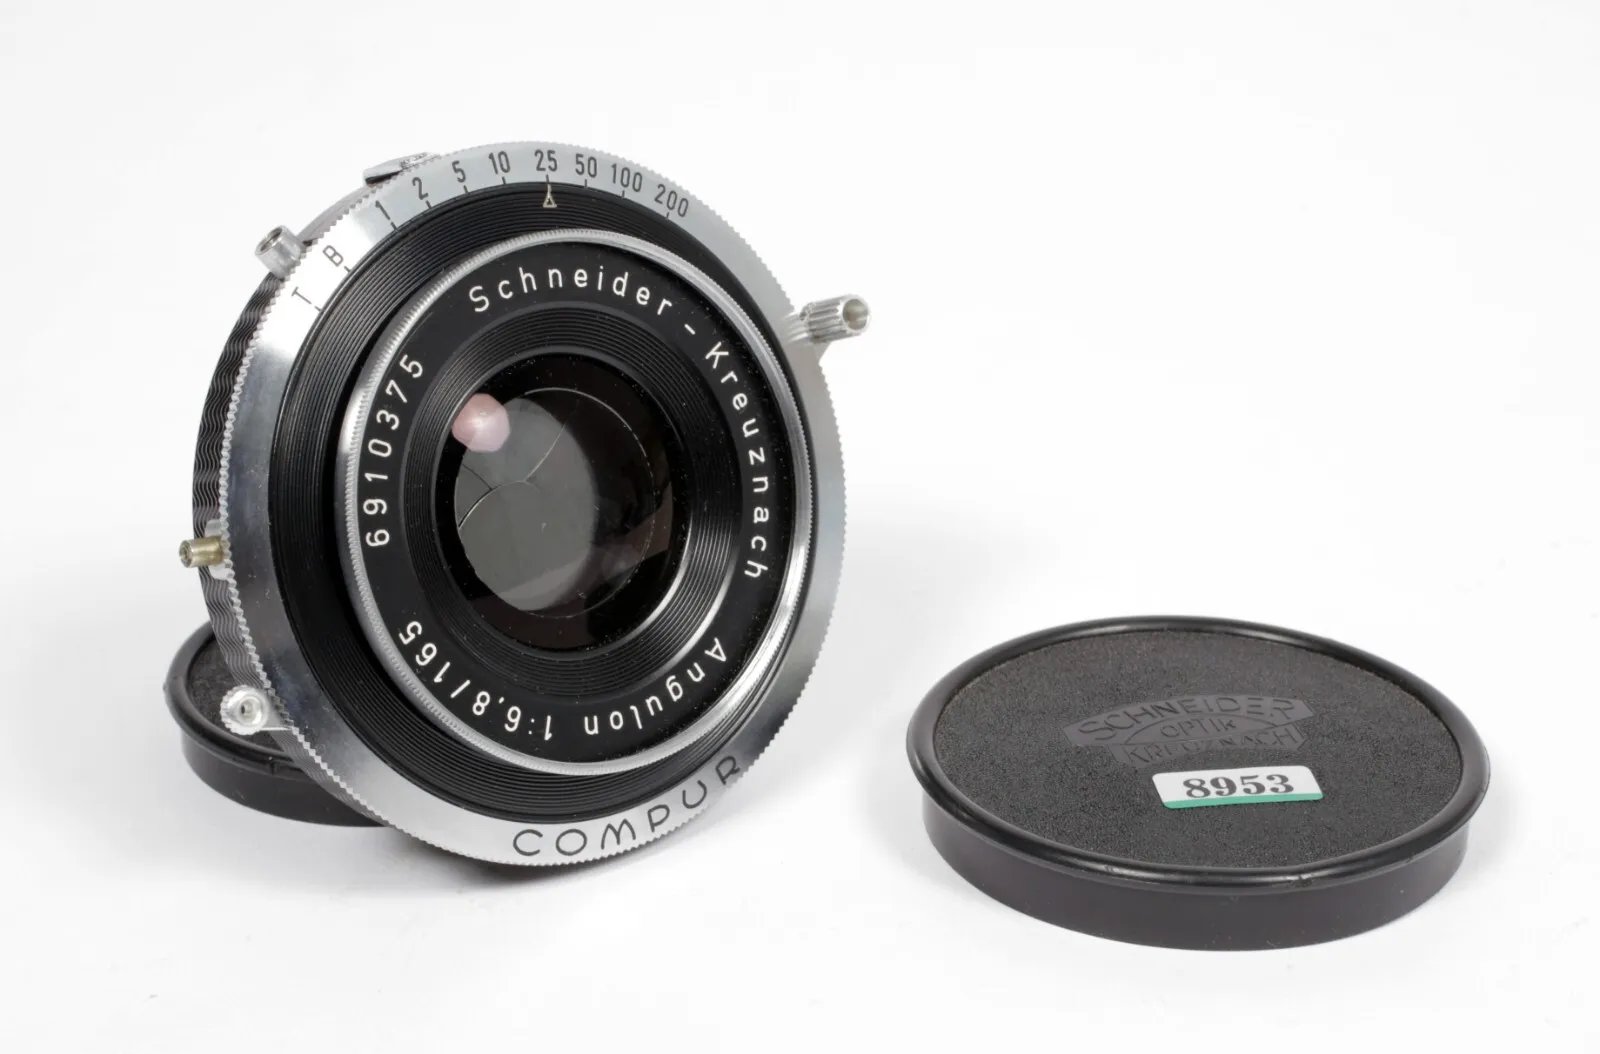 Schneider Angulon 165mm F6.8 in Compur #2 wide angle lens for 8X10 